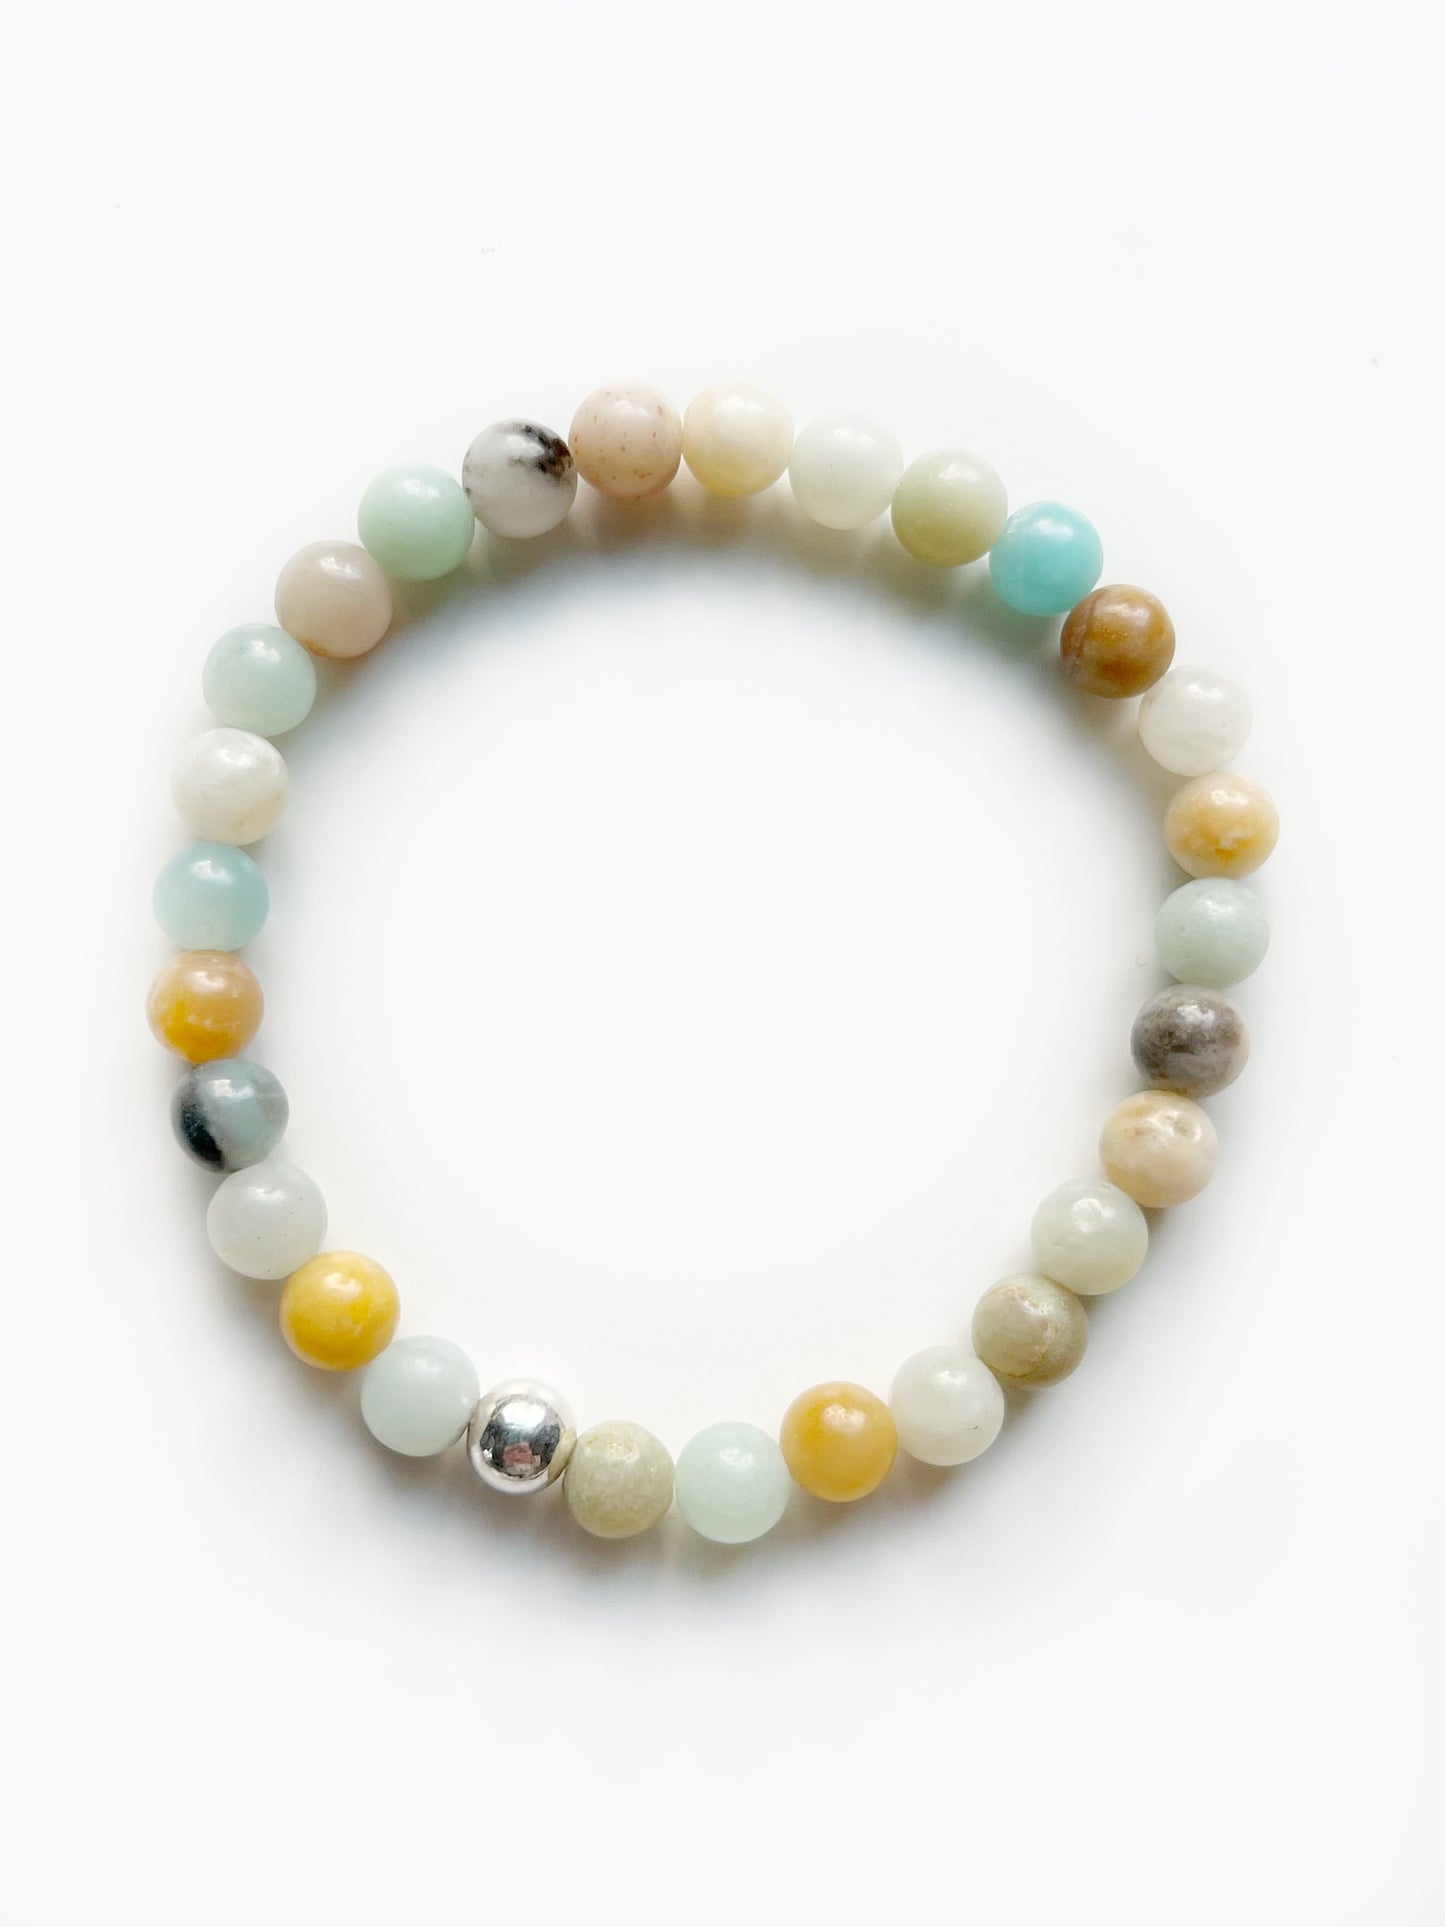 a multi colored stretch bracelet with light blue, yellow, black, white and orange beads. And one silver bead